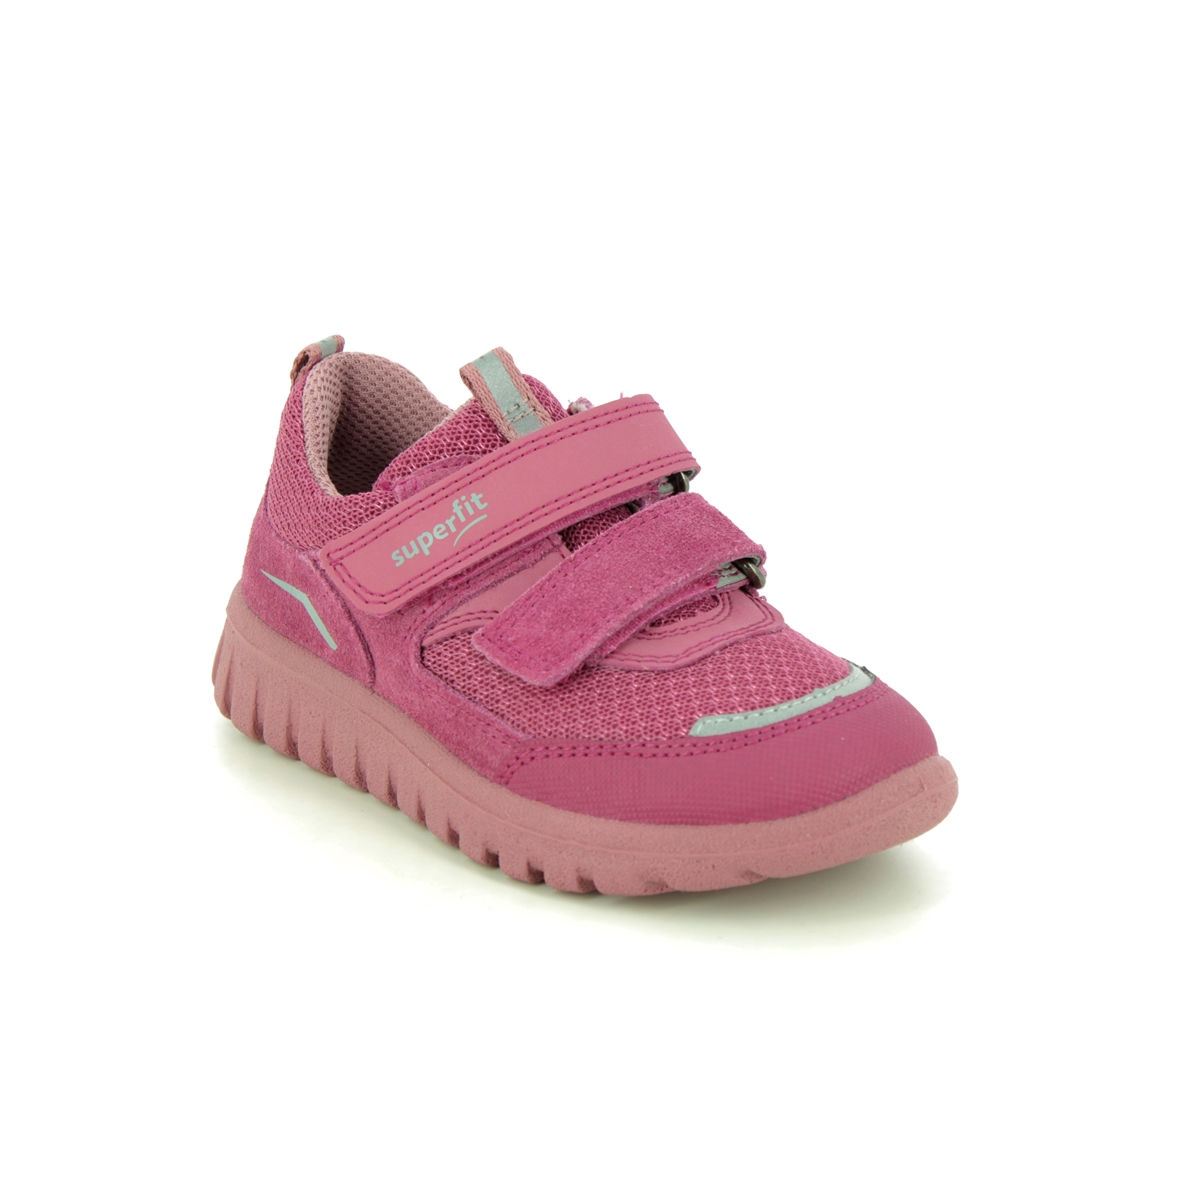 Superfit Sport7 Mini 2V Hot Pink Kids Girls Trainers 1006194-5520 In Size 24 In Plain Hot Pink For kids